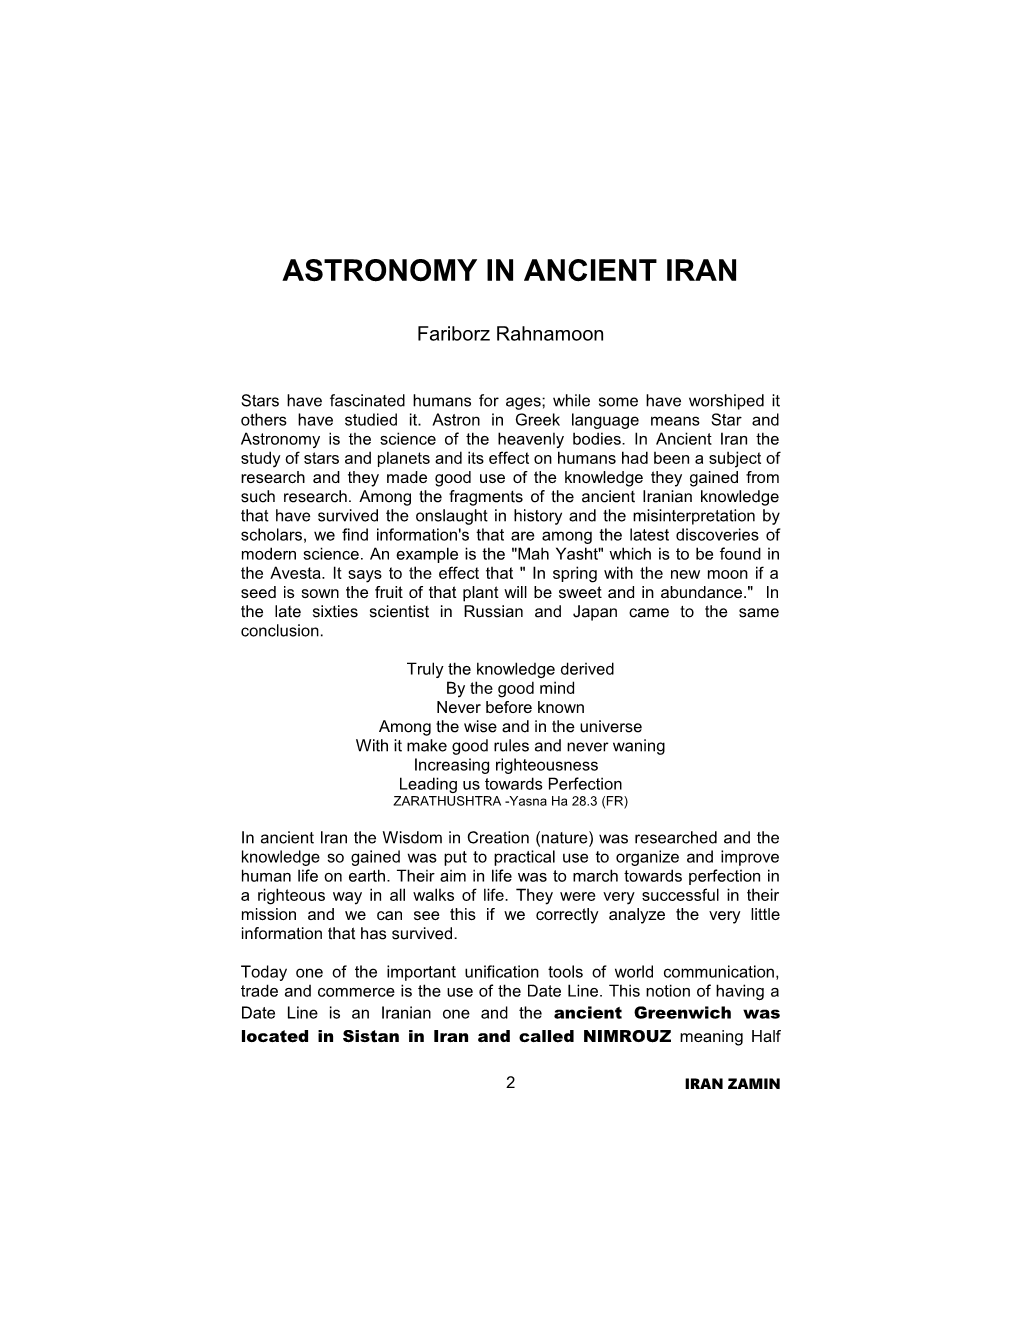 Astronomy in Ancient Iran